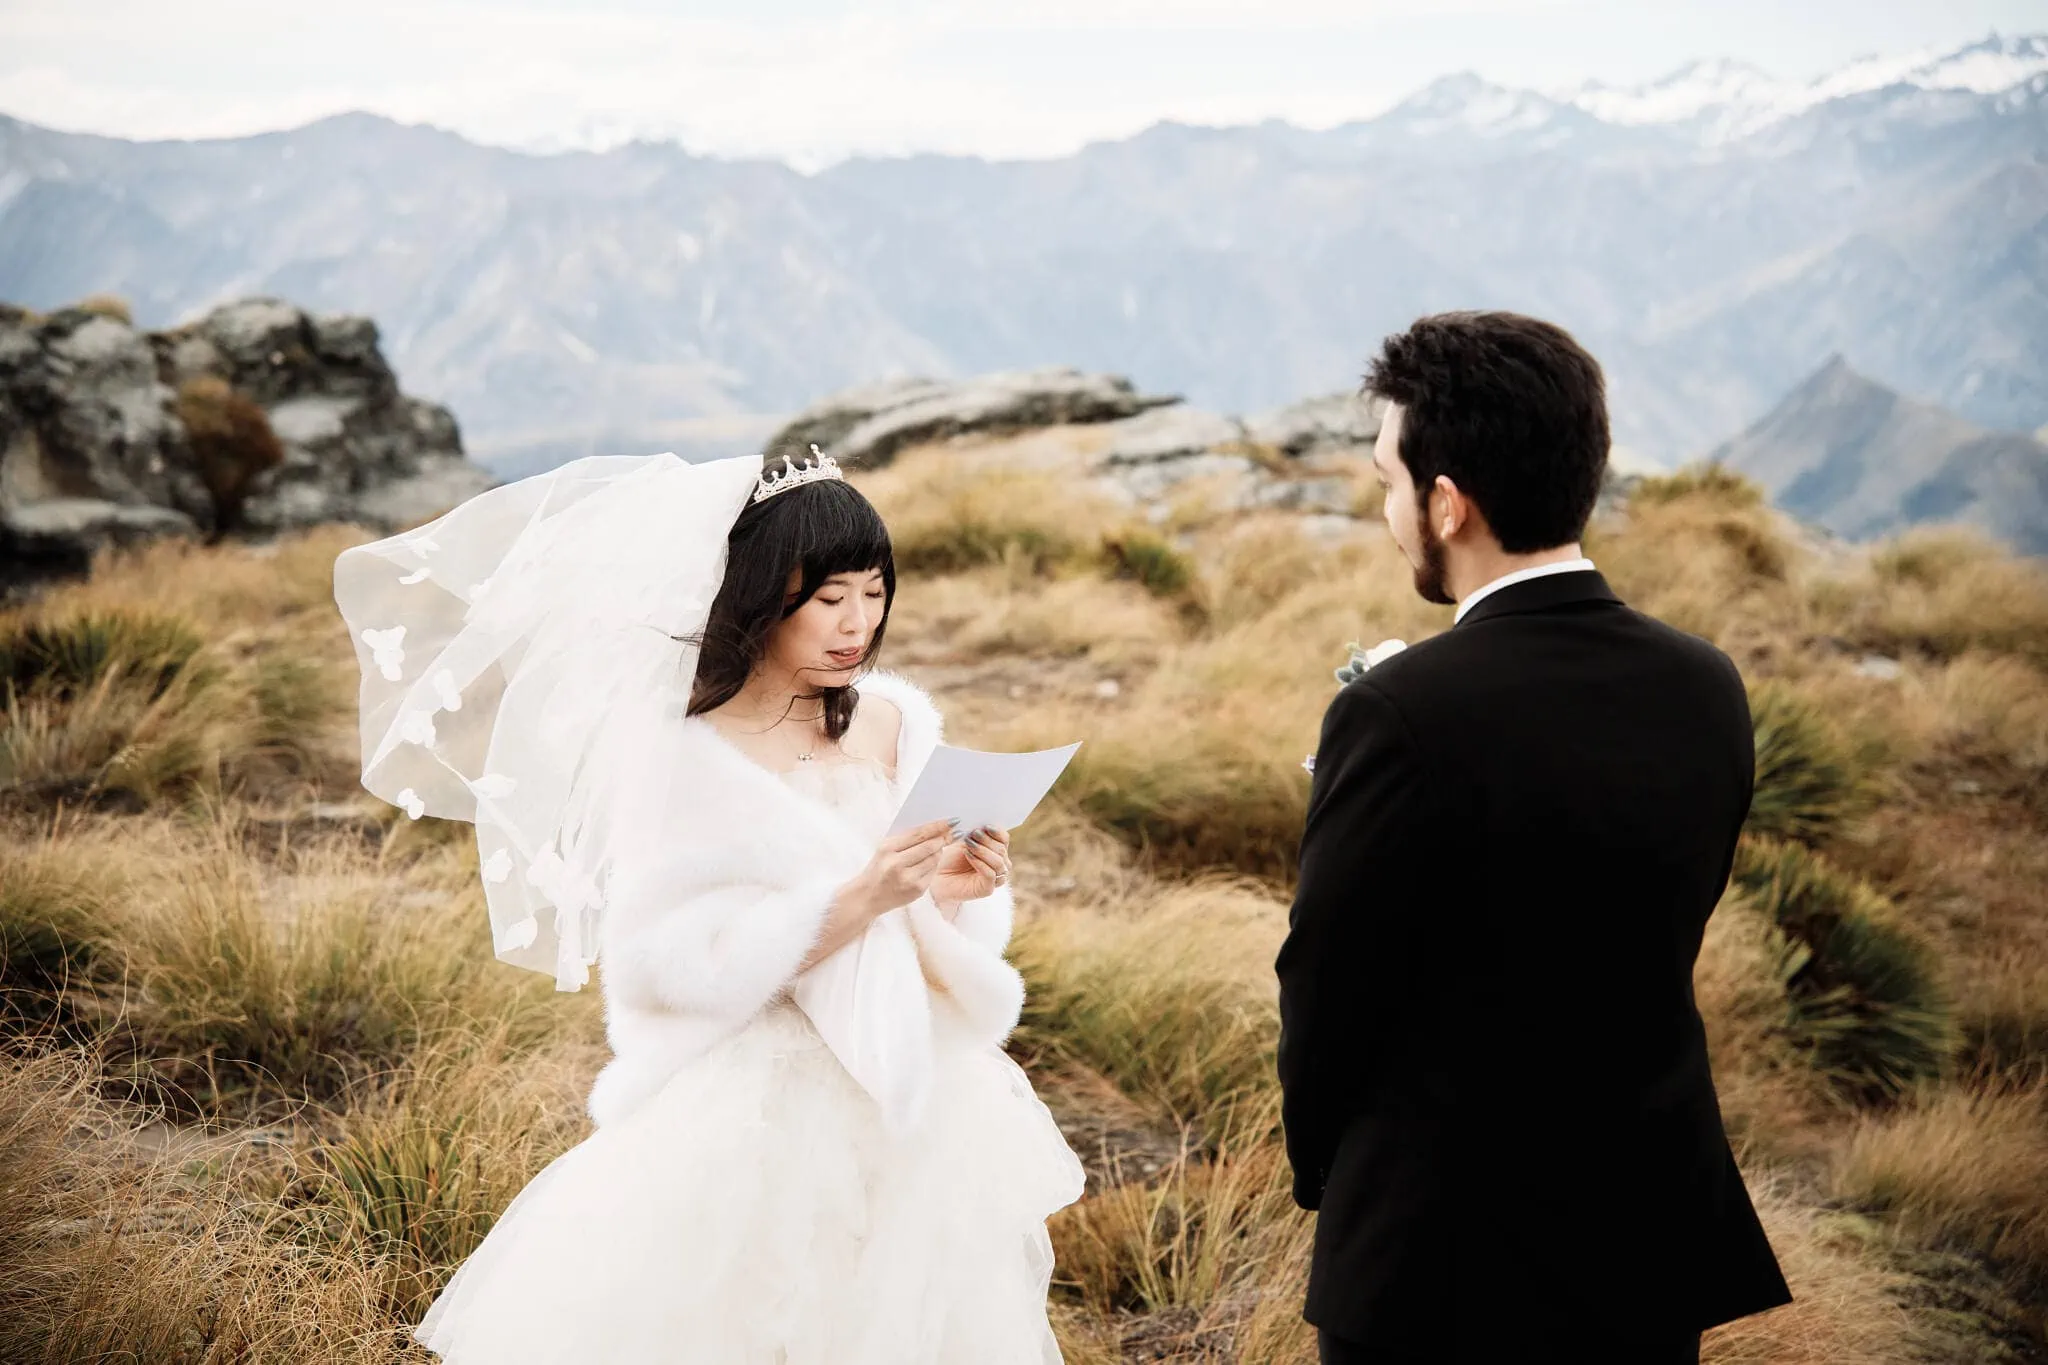 Carlos and Wanzhu's intimate elopement wedding on Cecil Peak.